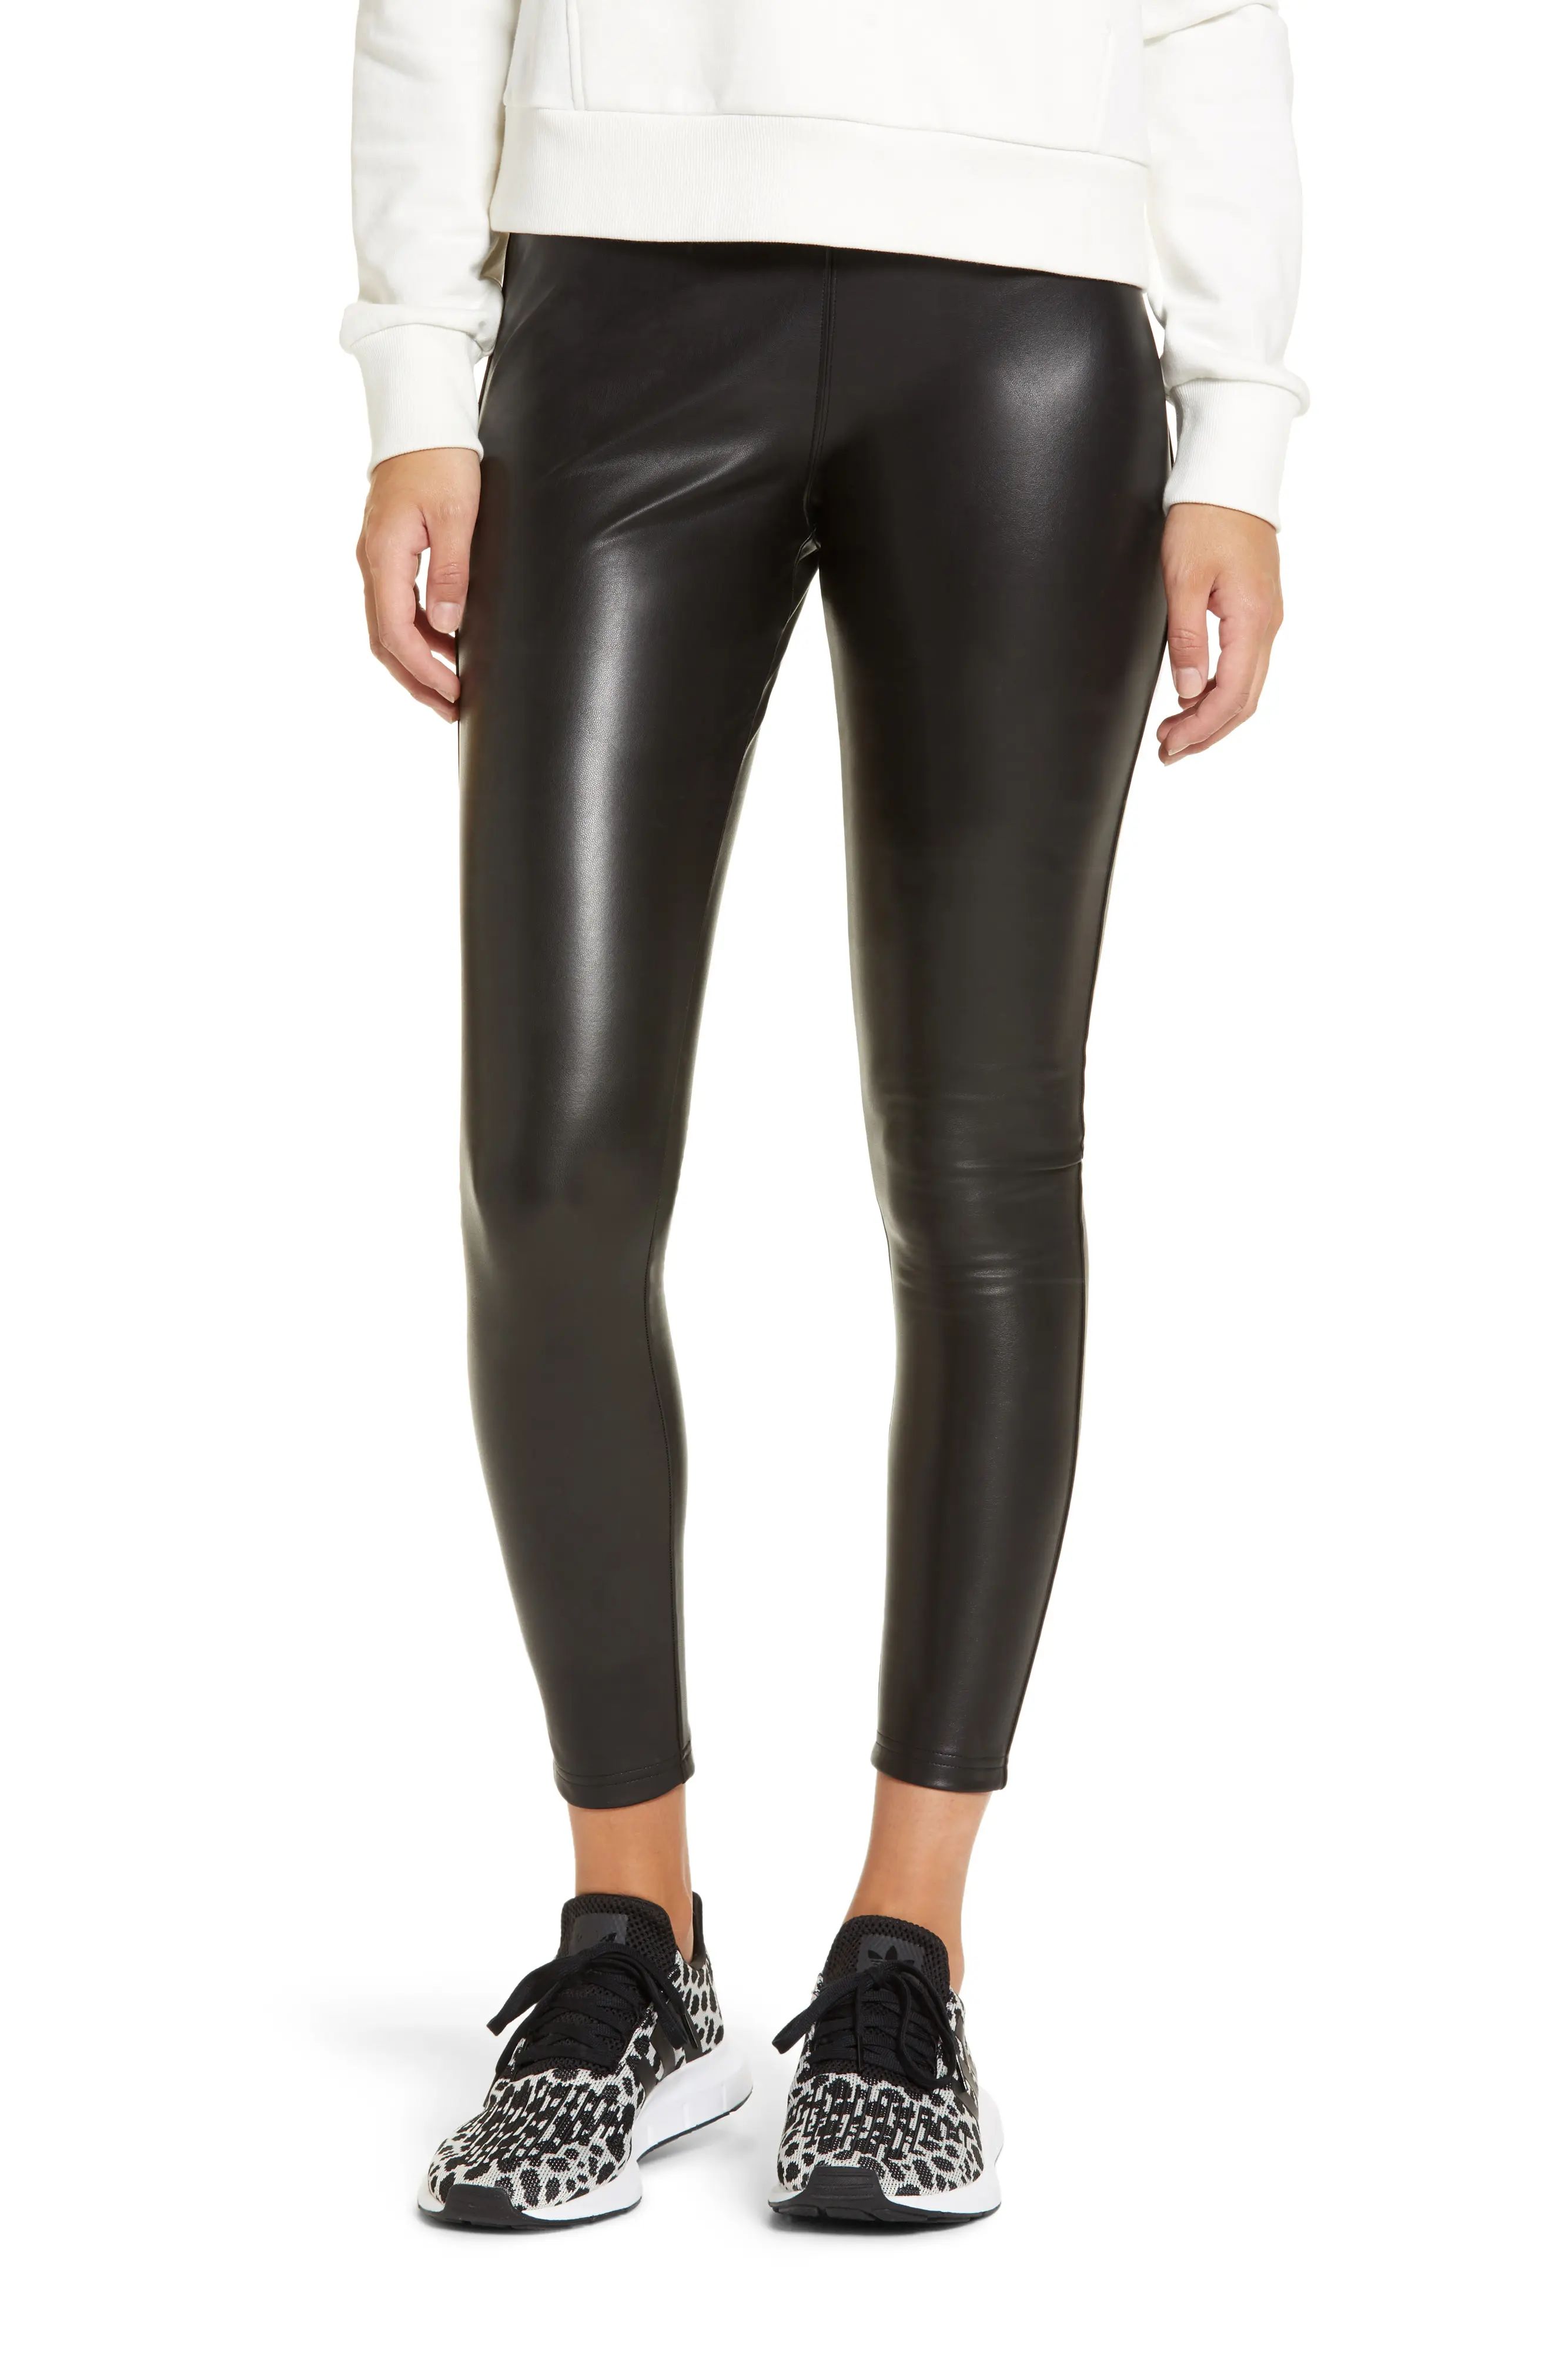 Nordstrom Faux Leather Leggings in Black at Nordstrom, Size Small | Nordstrom